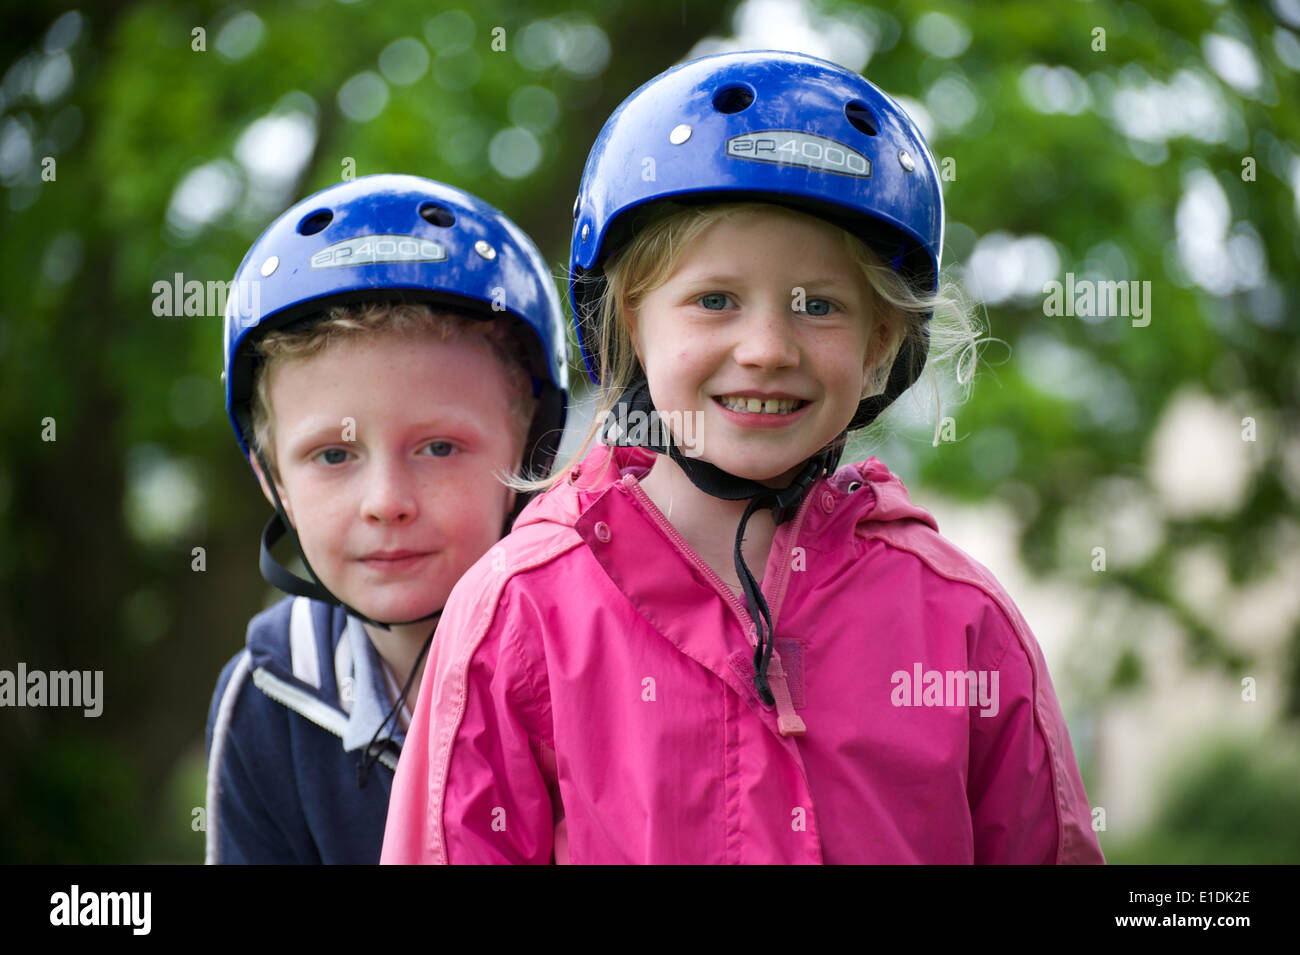 Two young blonde children wearing helmets get ready for some outdoor activity sport Stock Photo